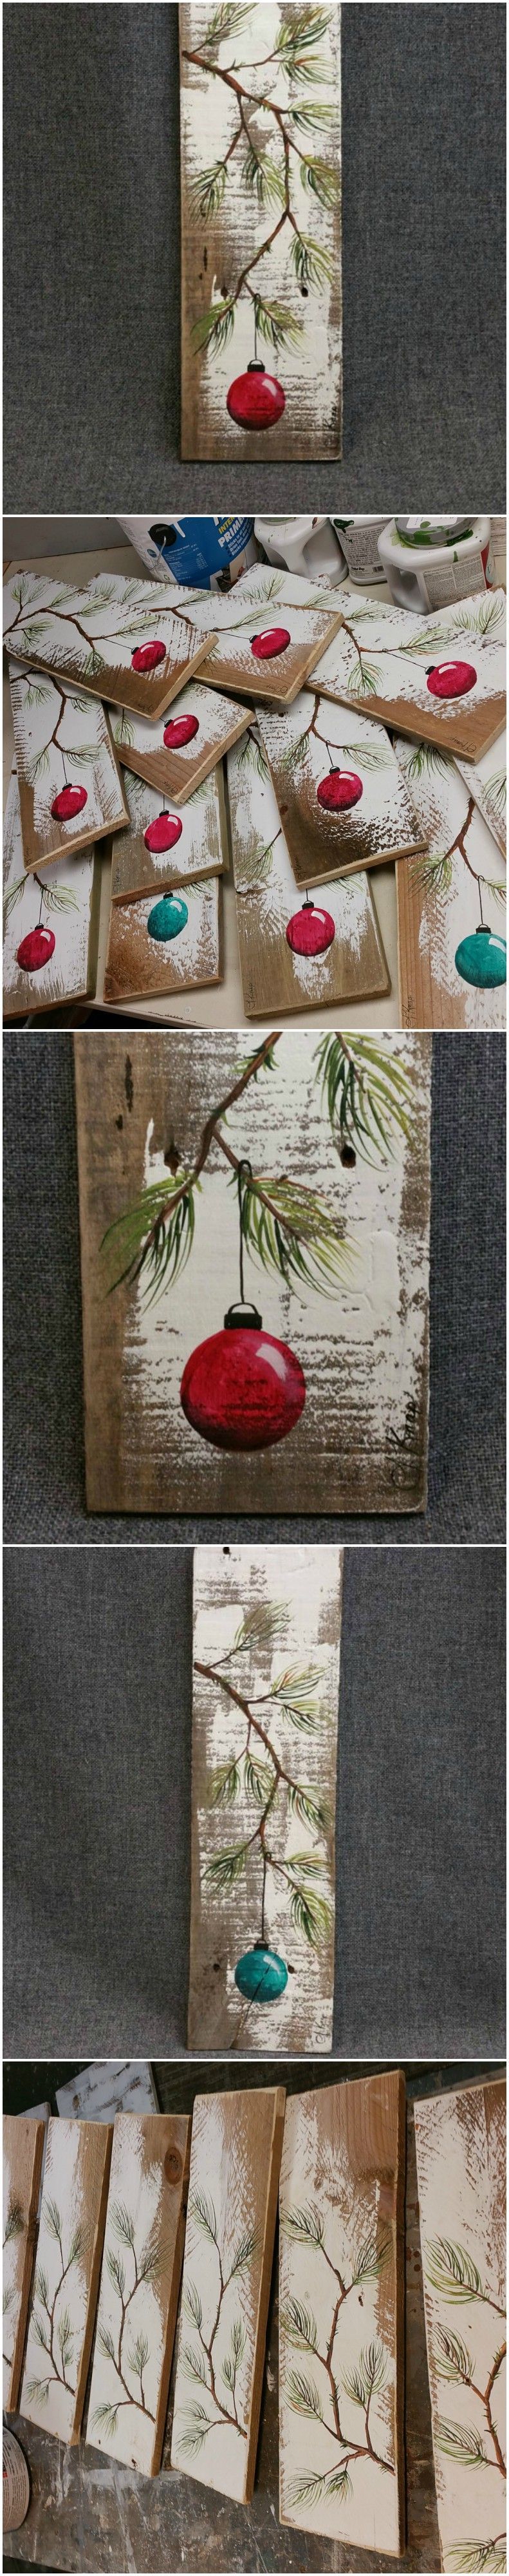 RED Hand painted Christmas decoration, GIFTS UNDER 25, Pine Branch with Red Bulb, Reclaimed barnwood, Pallet art, Shabby chic